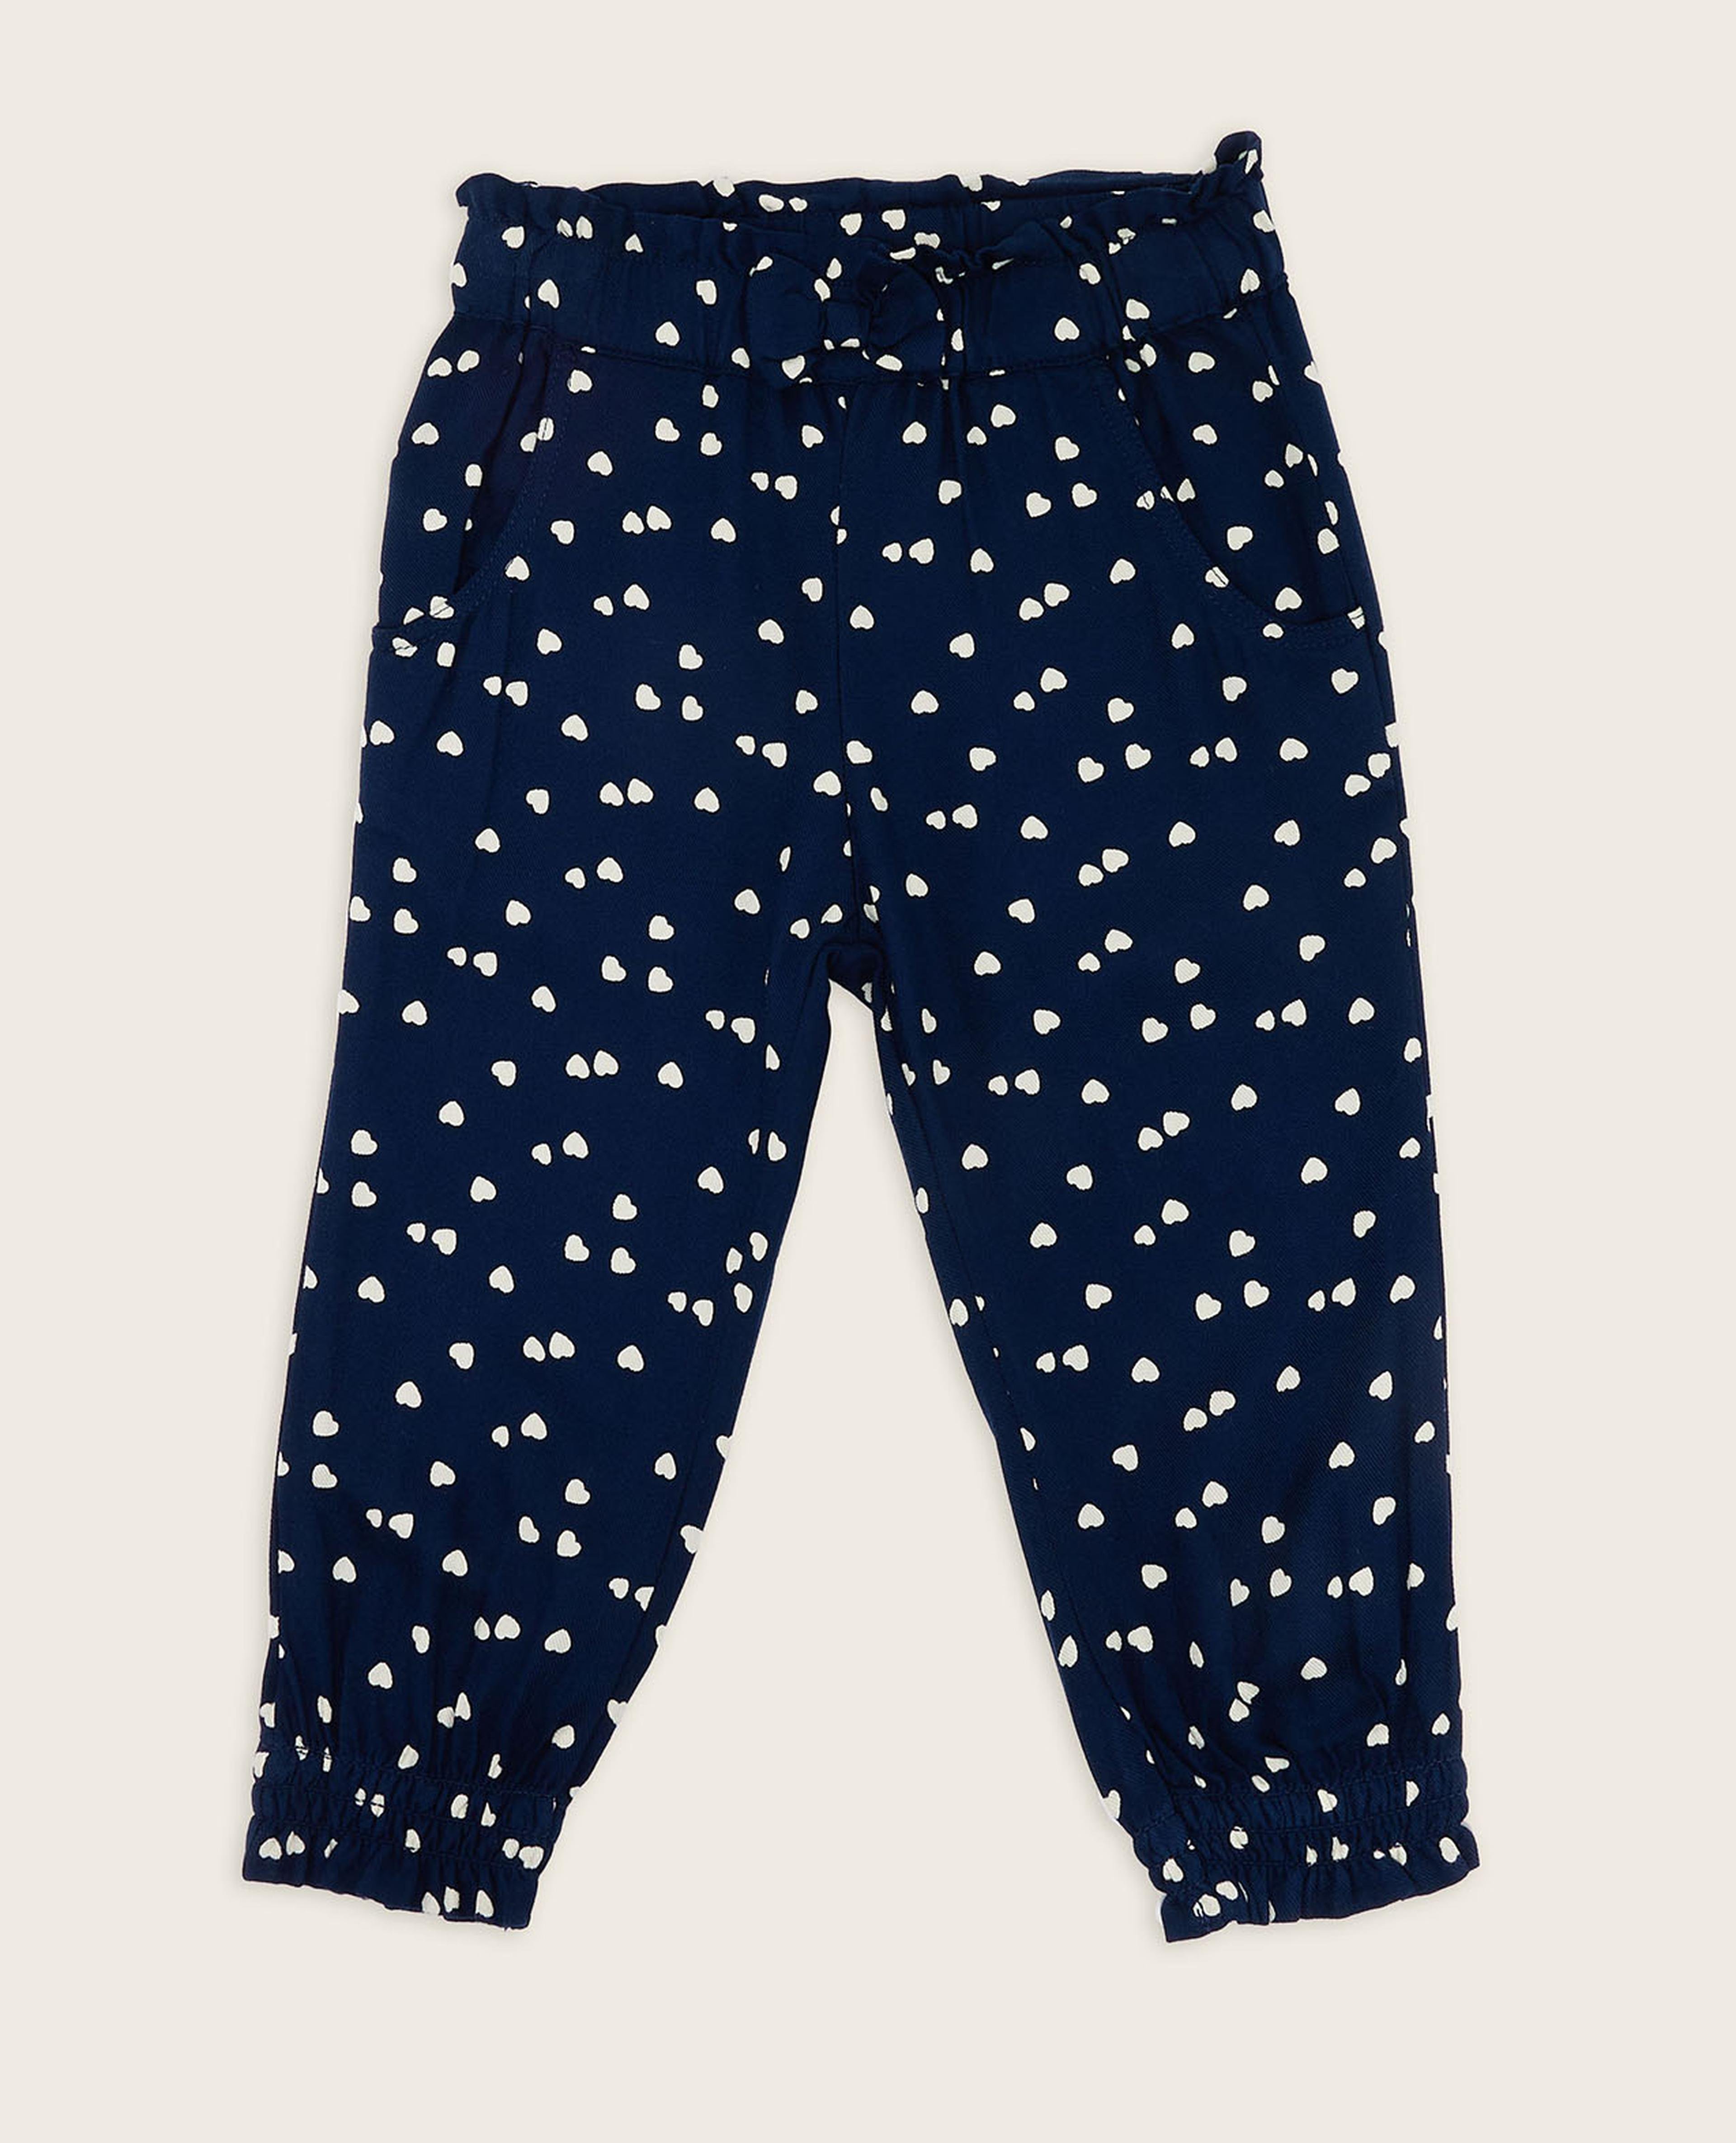 Heart Patterned Pants with Elastic Waist